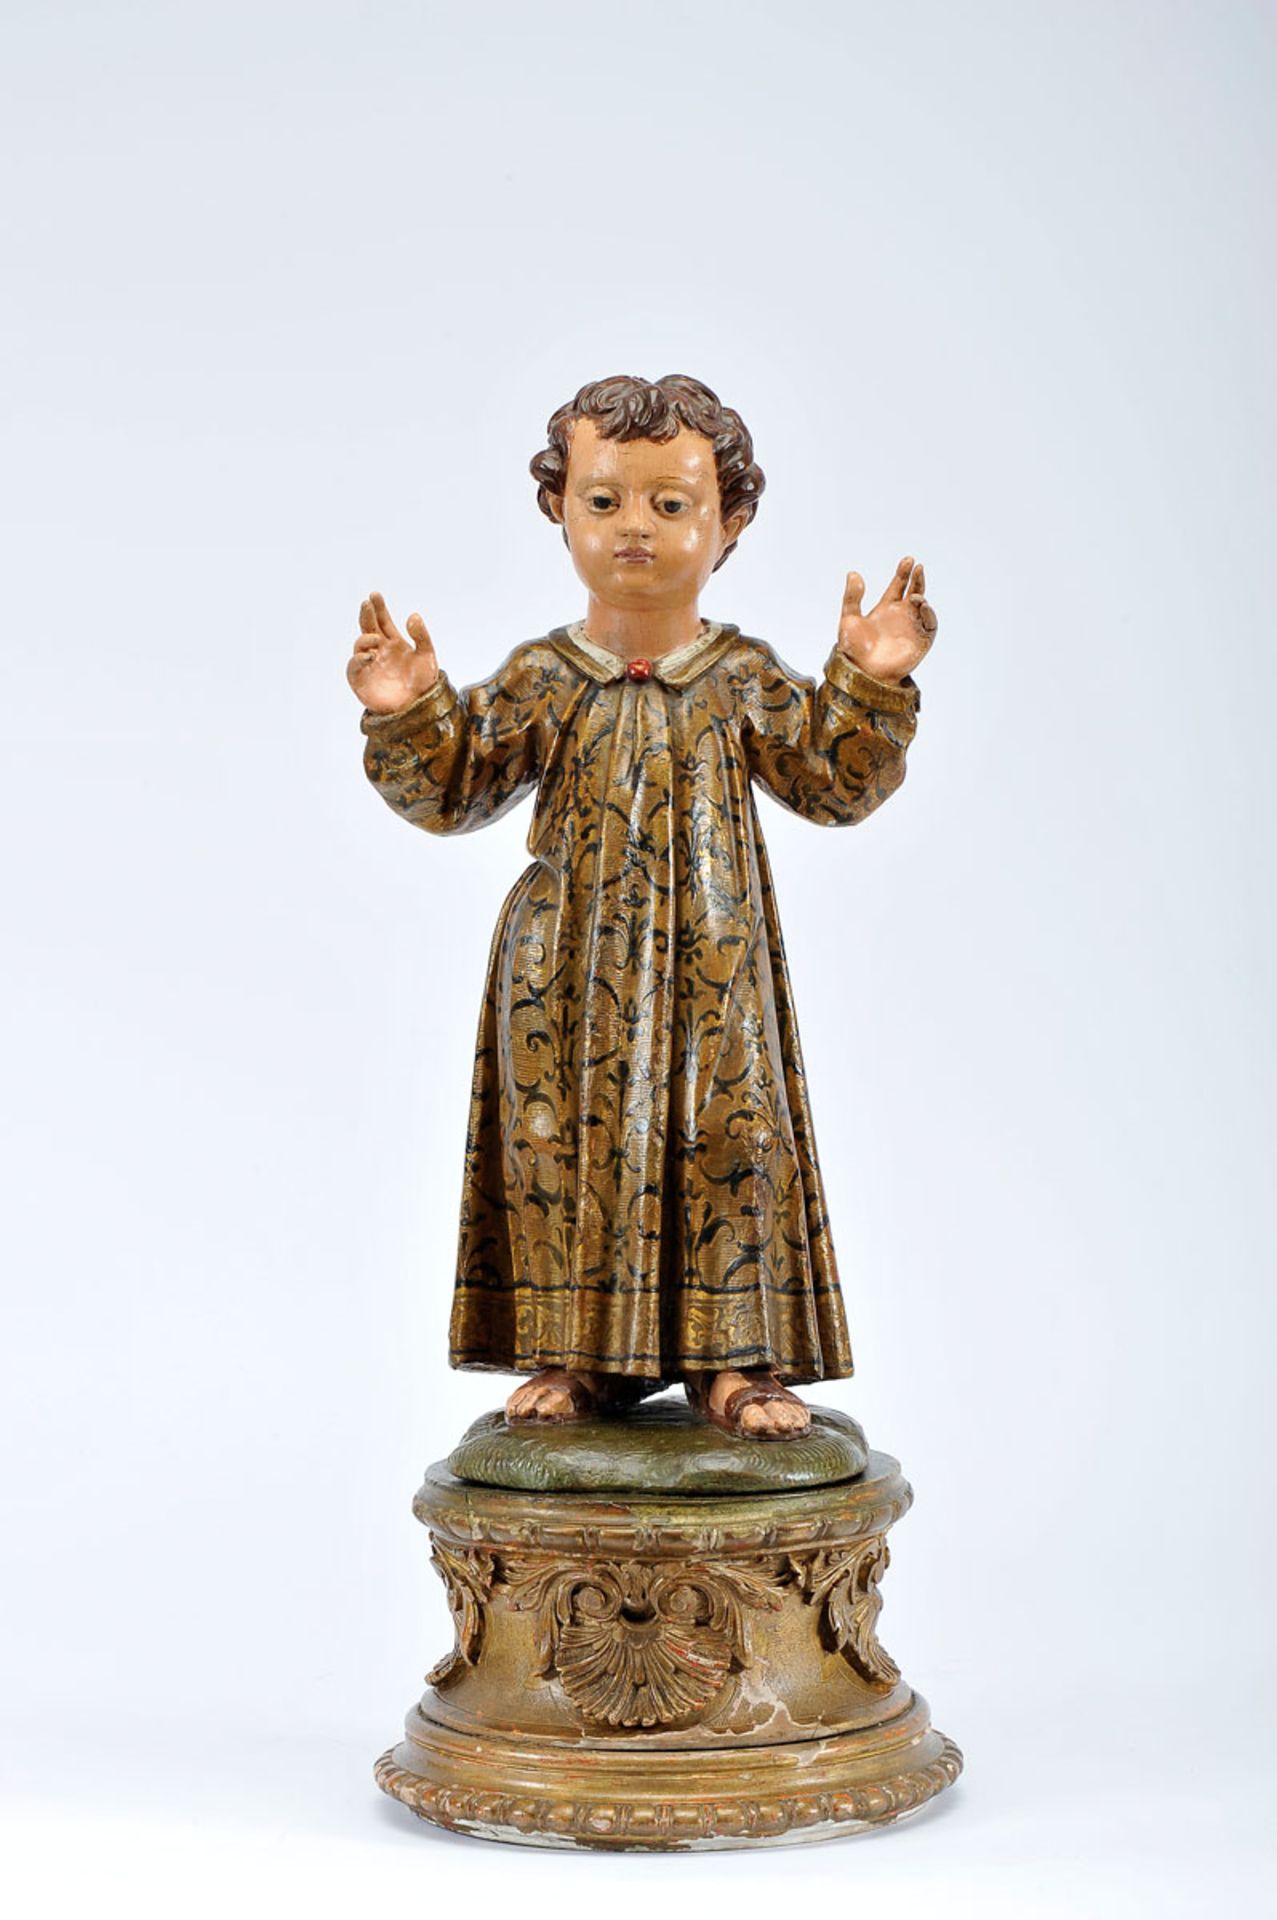 The Child Jesus, polychrome and gilt wooden sculpture, gilt wooden base en relief with shell motifs,